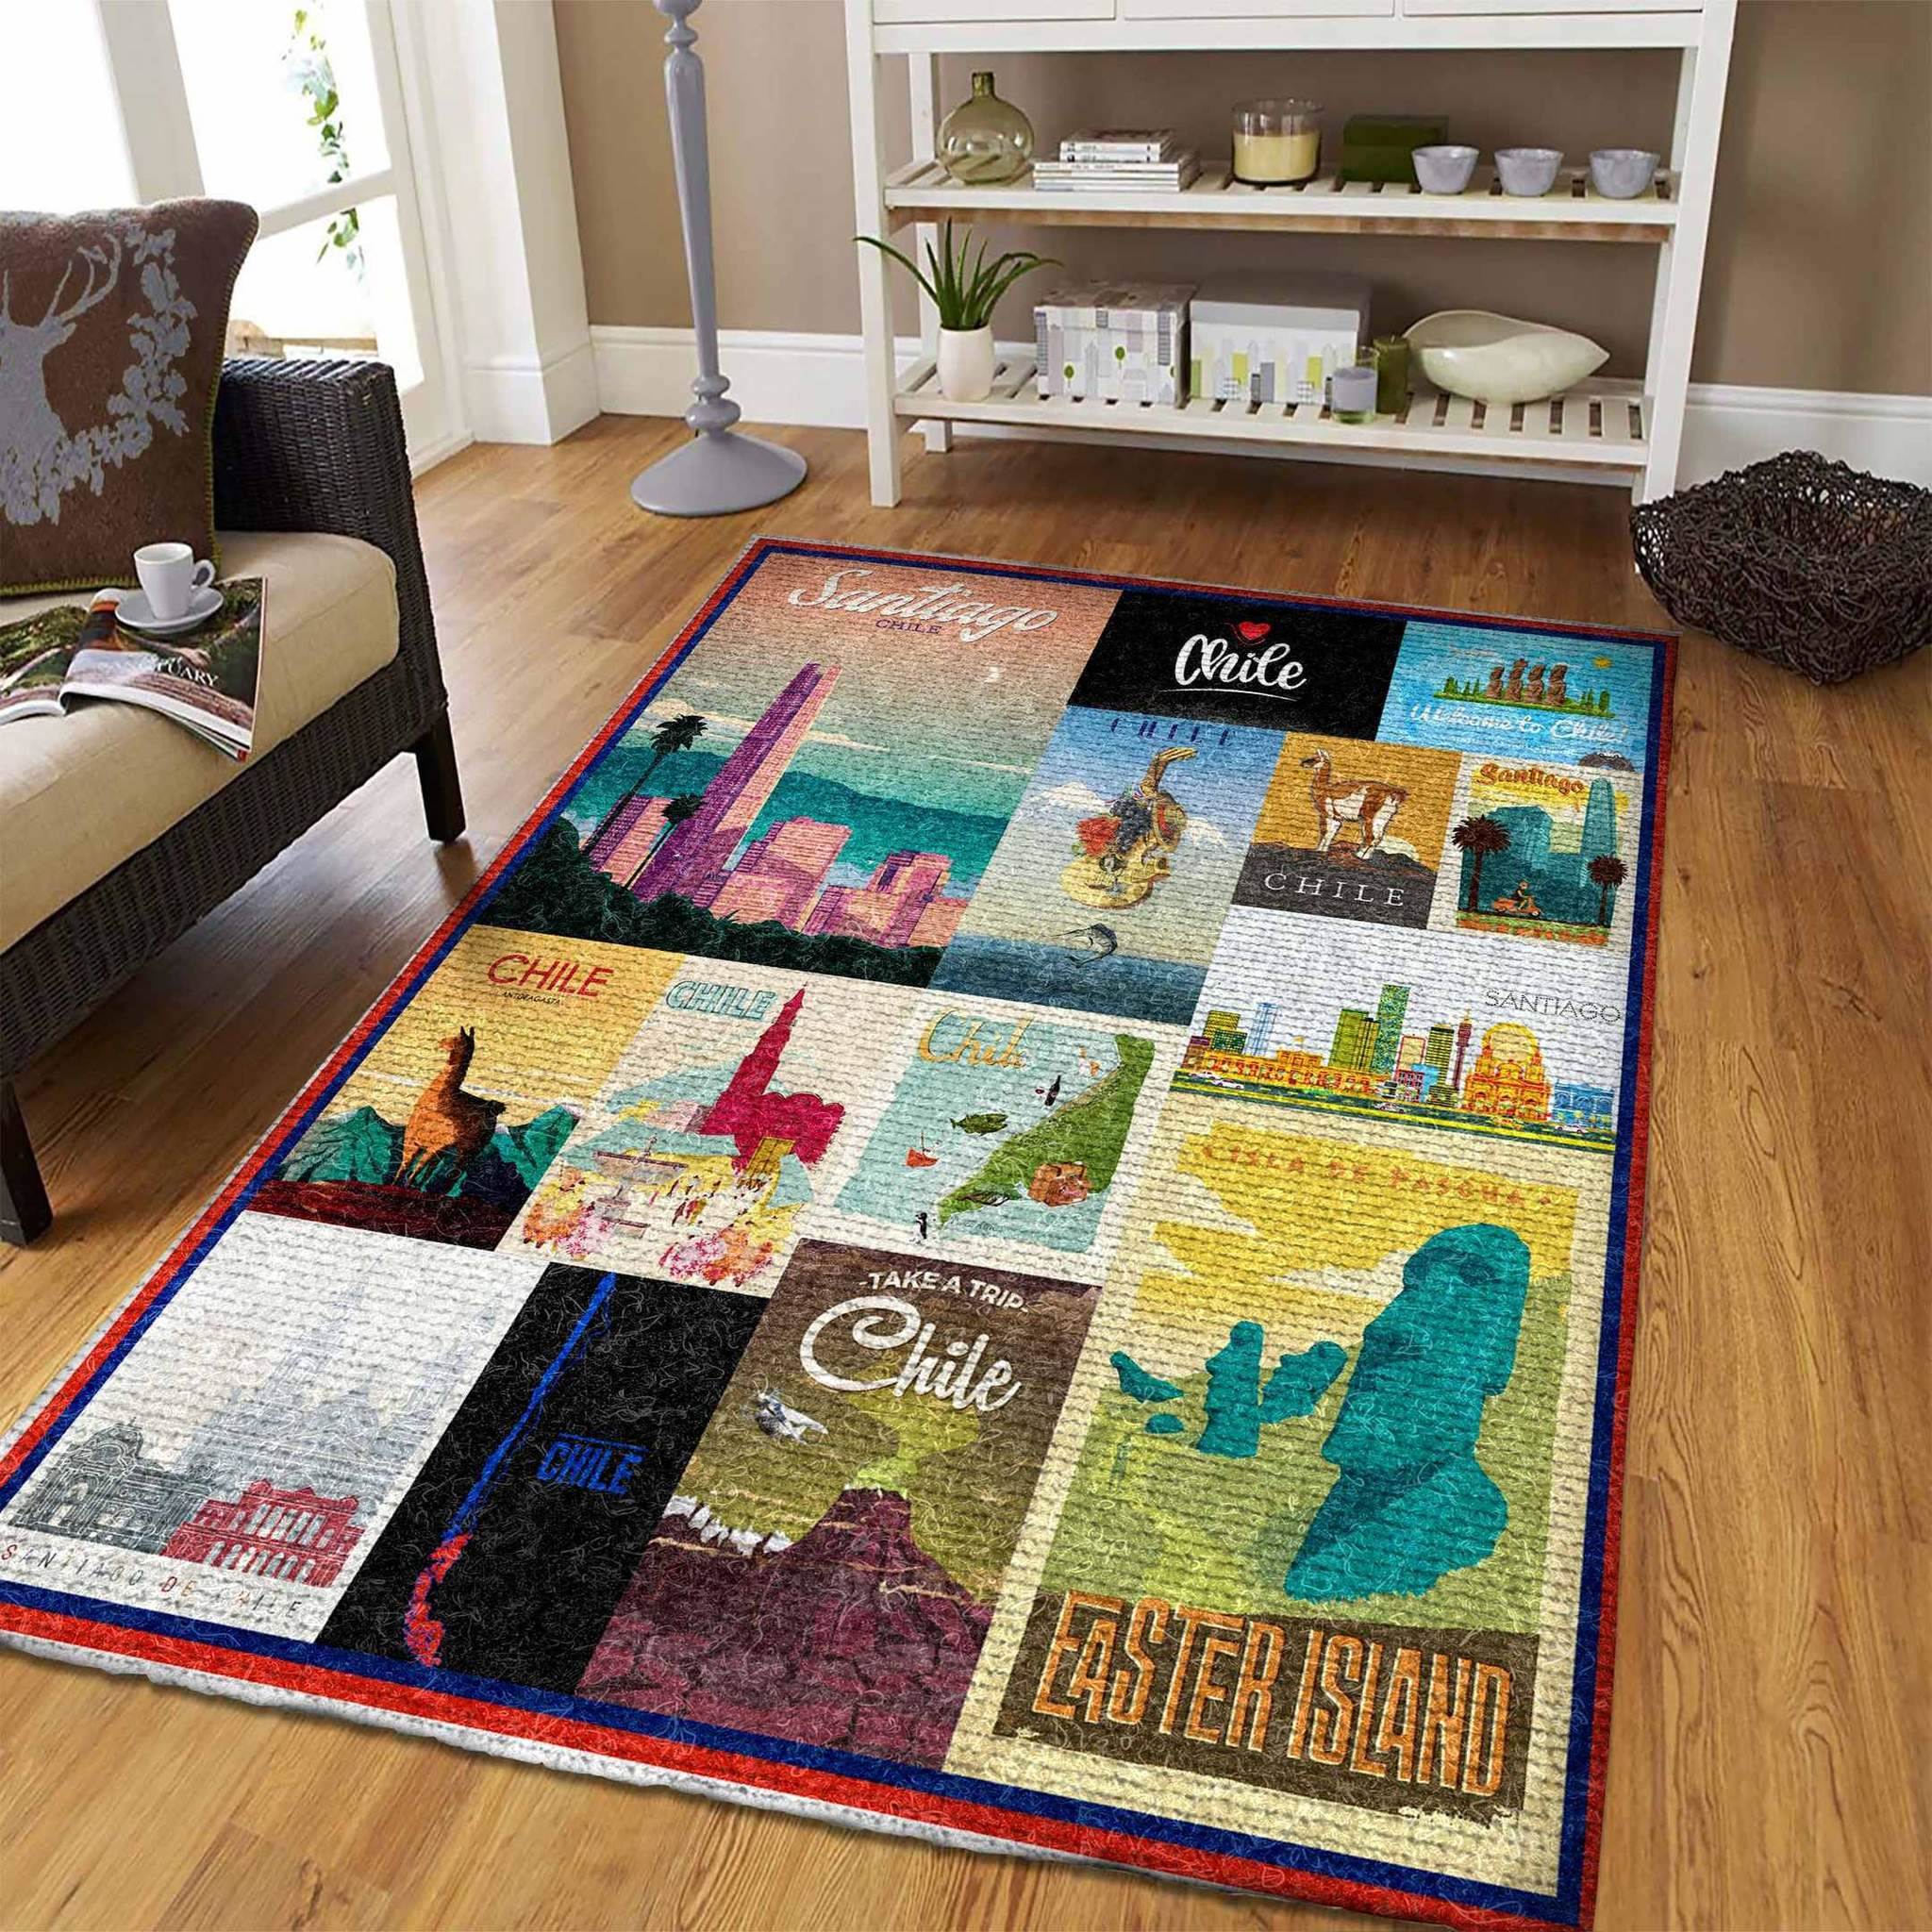 Chile Limited Edition Amazon Best Seller Sku 268014 Rug